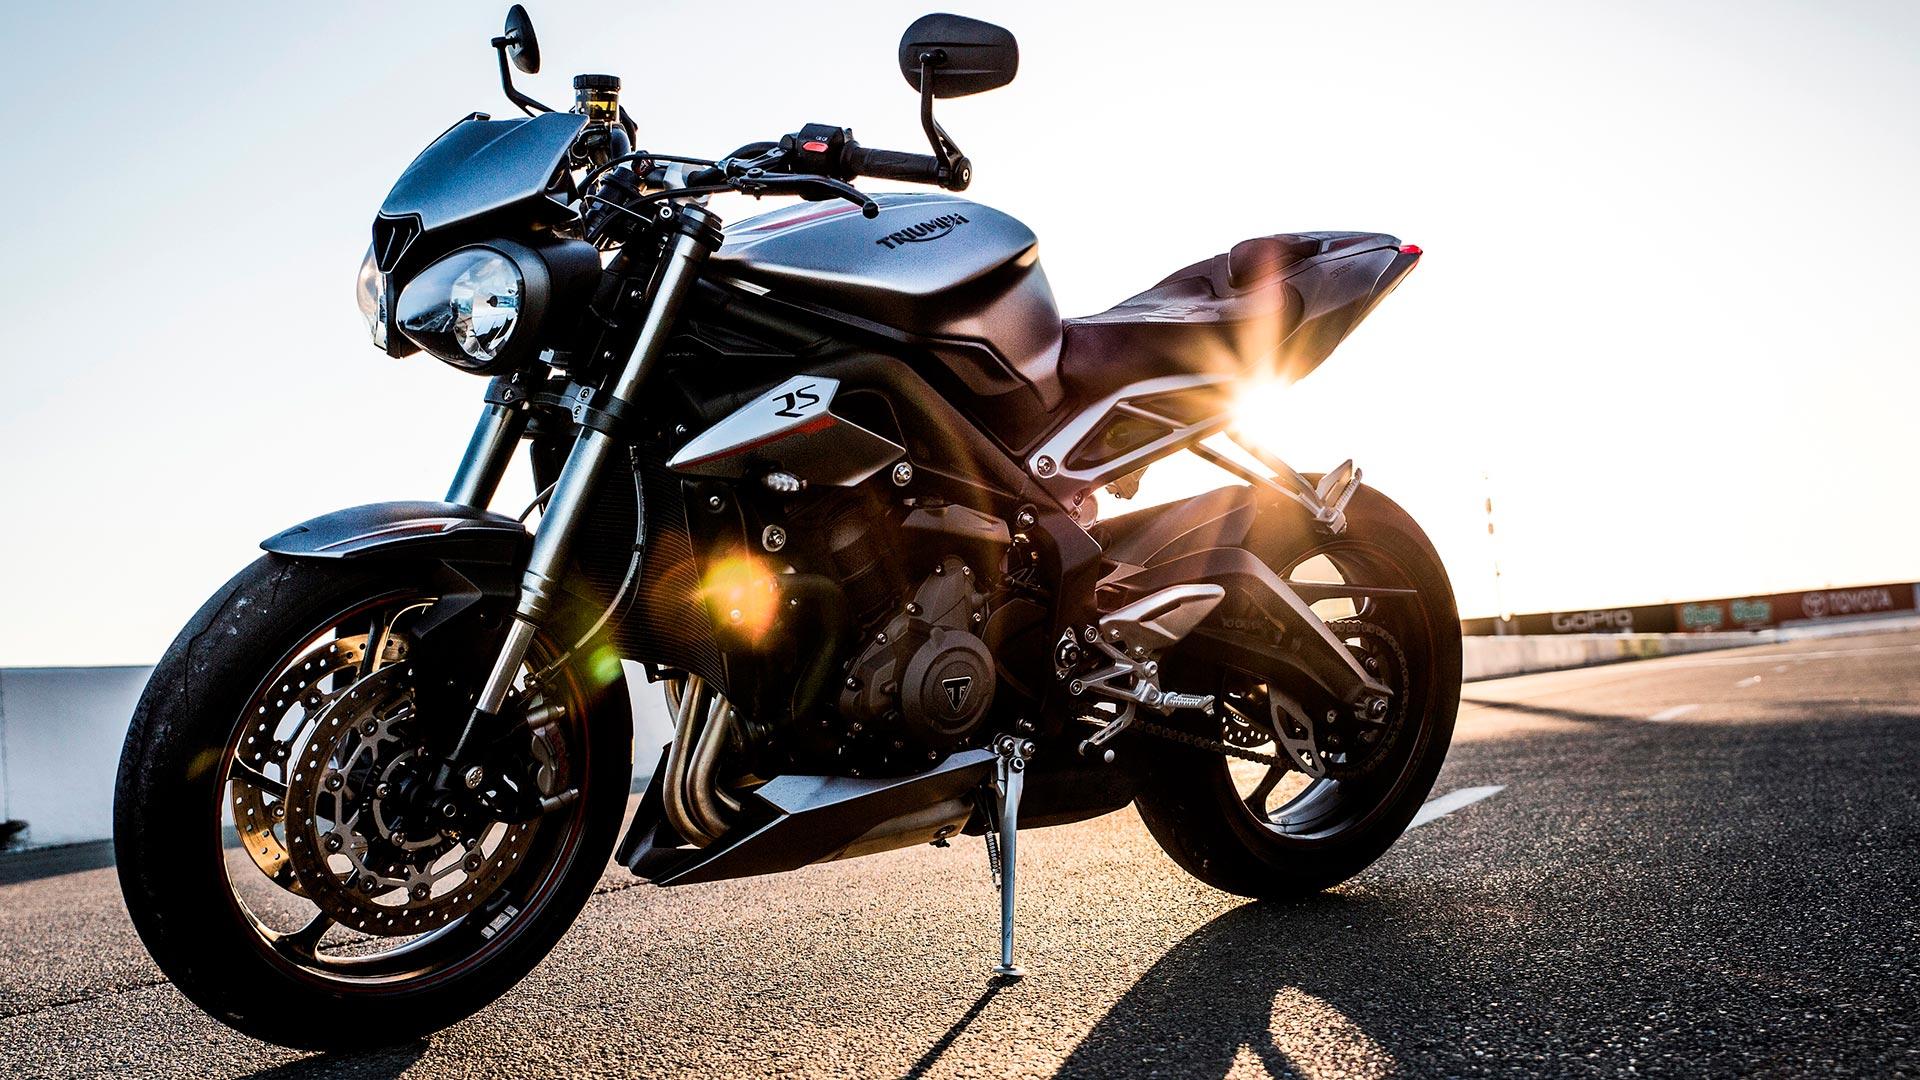 Street Triple Engine. For the Ride